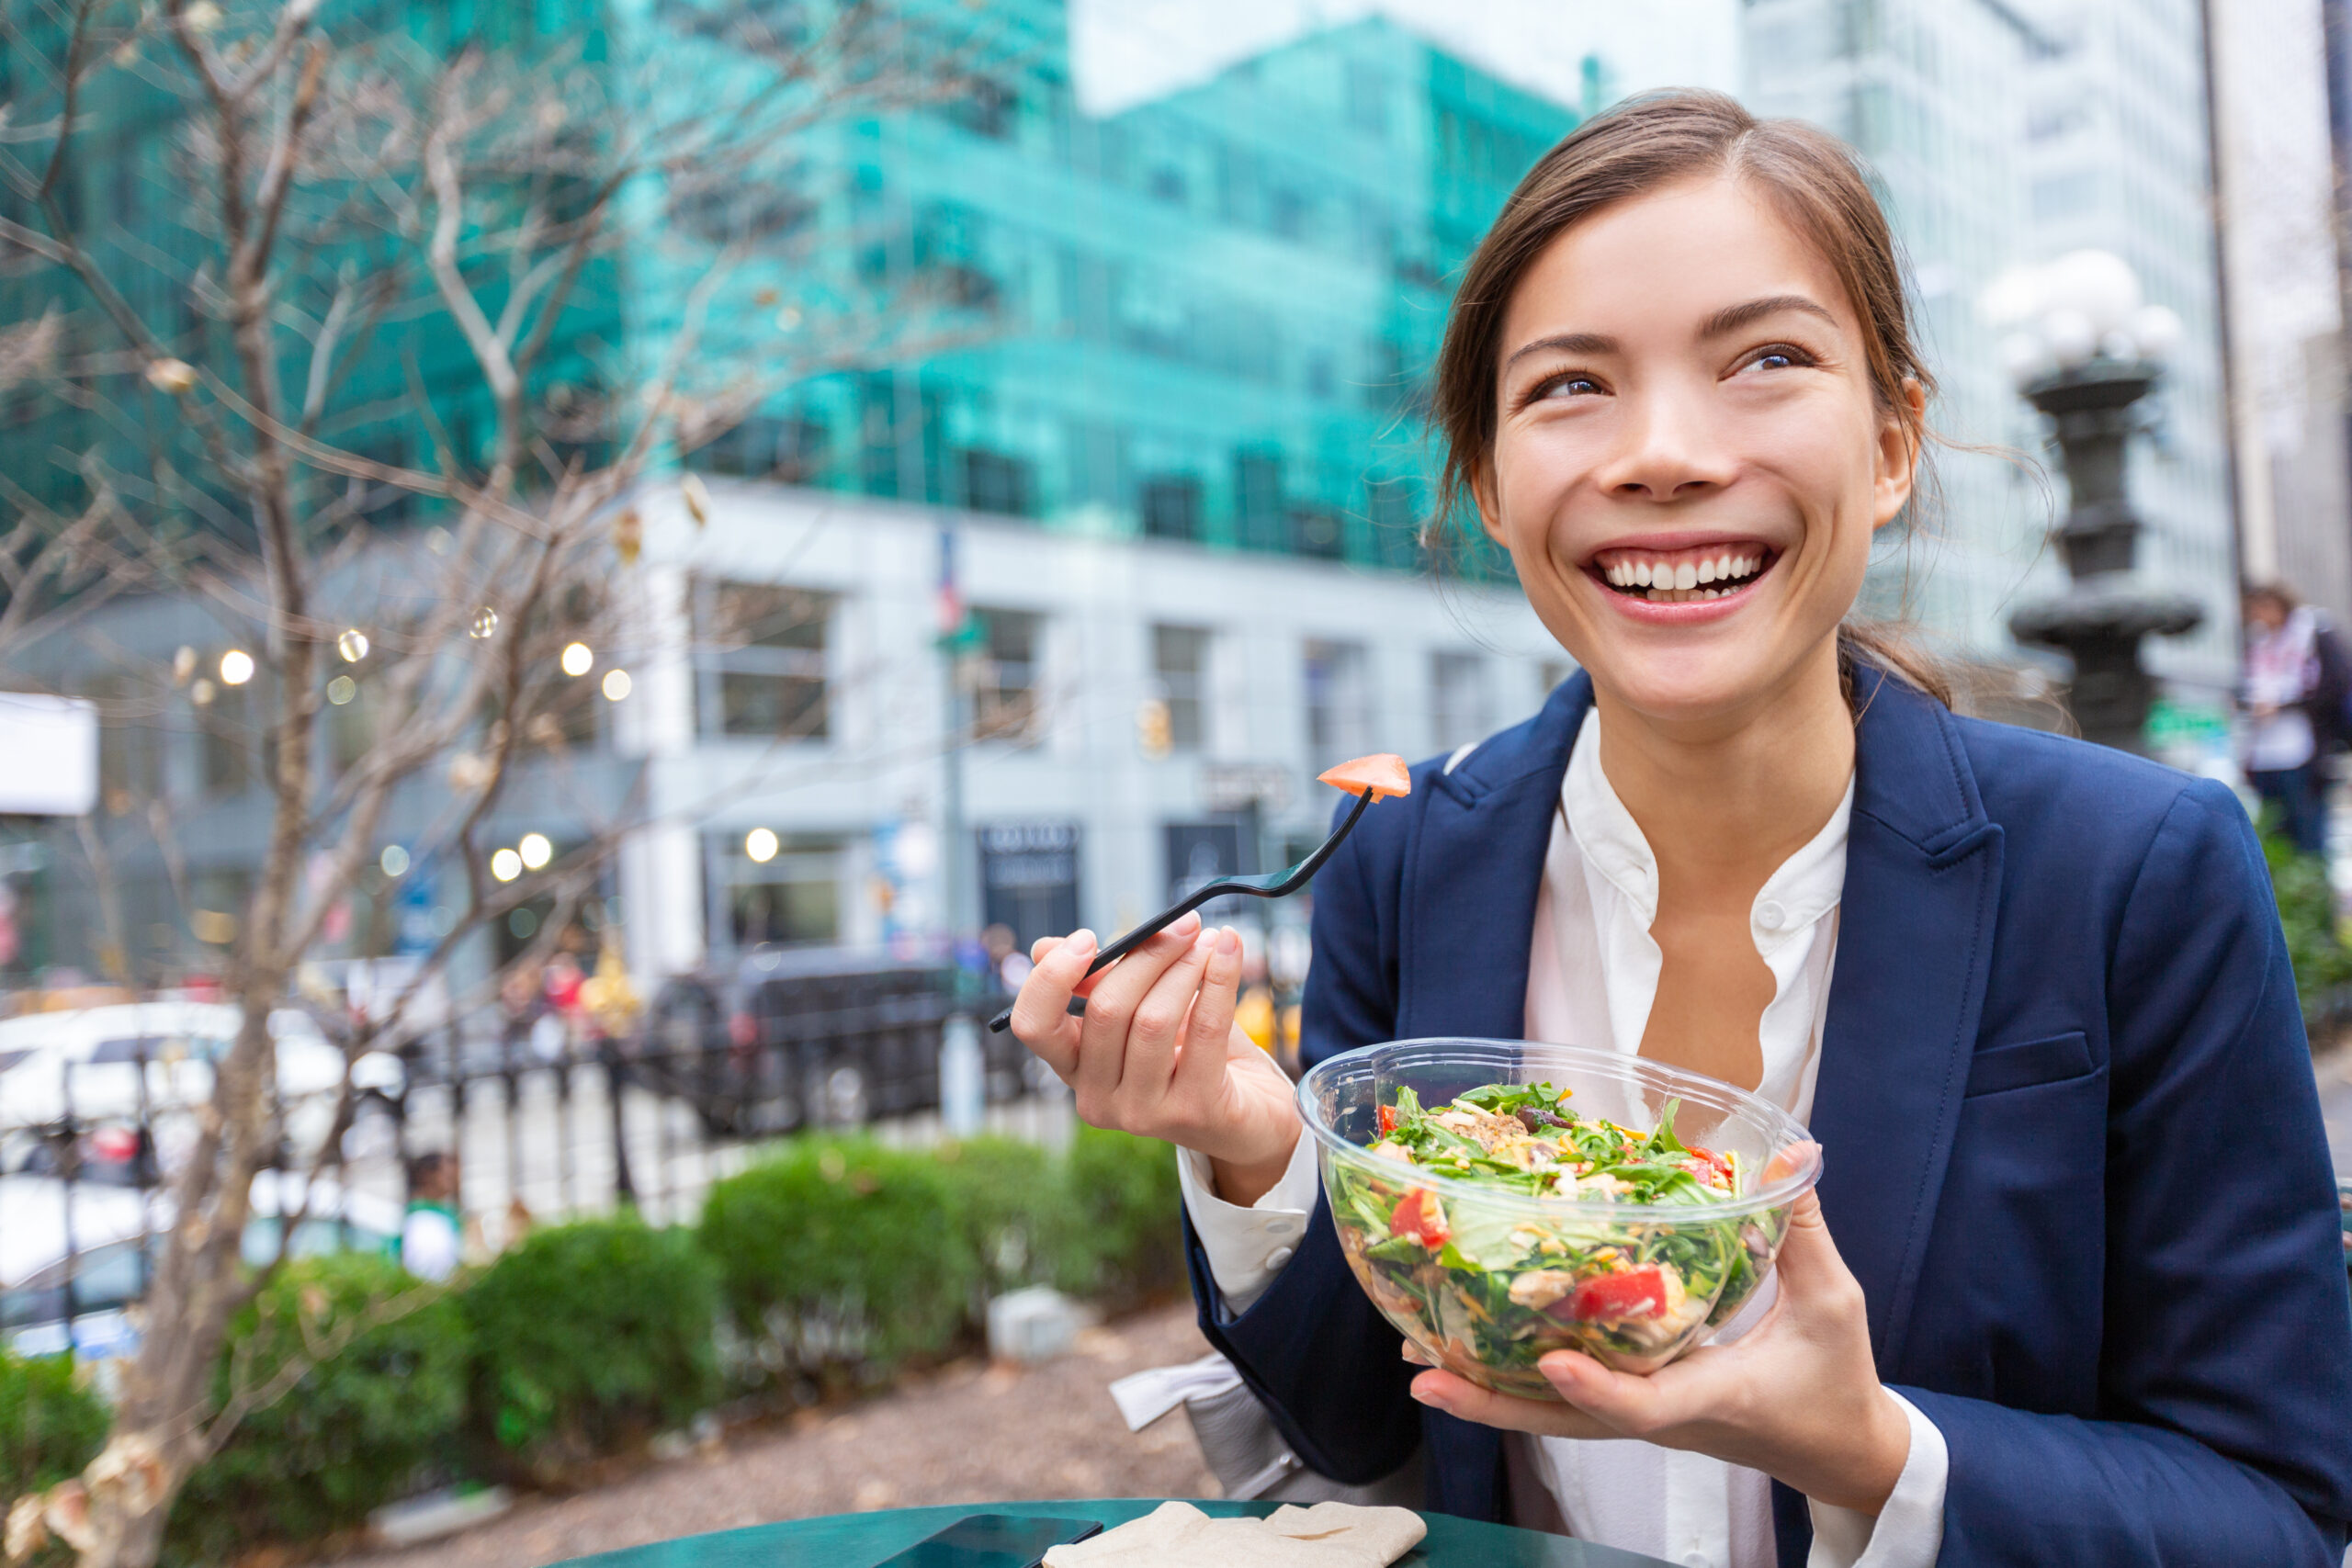 woman in a business suit smiles while taking a bite of salad in an outdoor city setting.